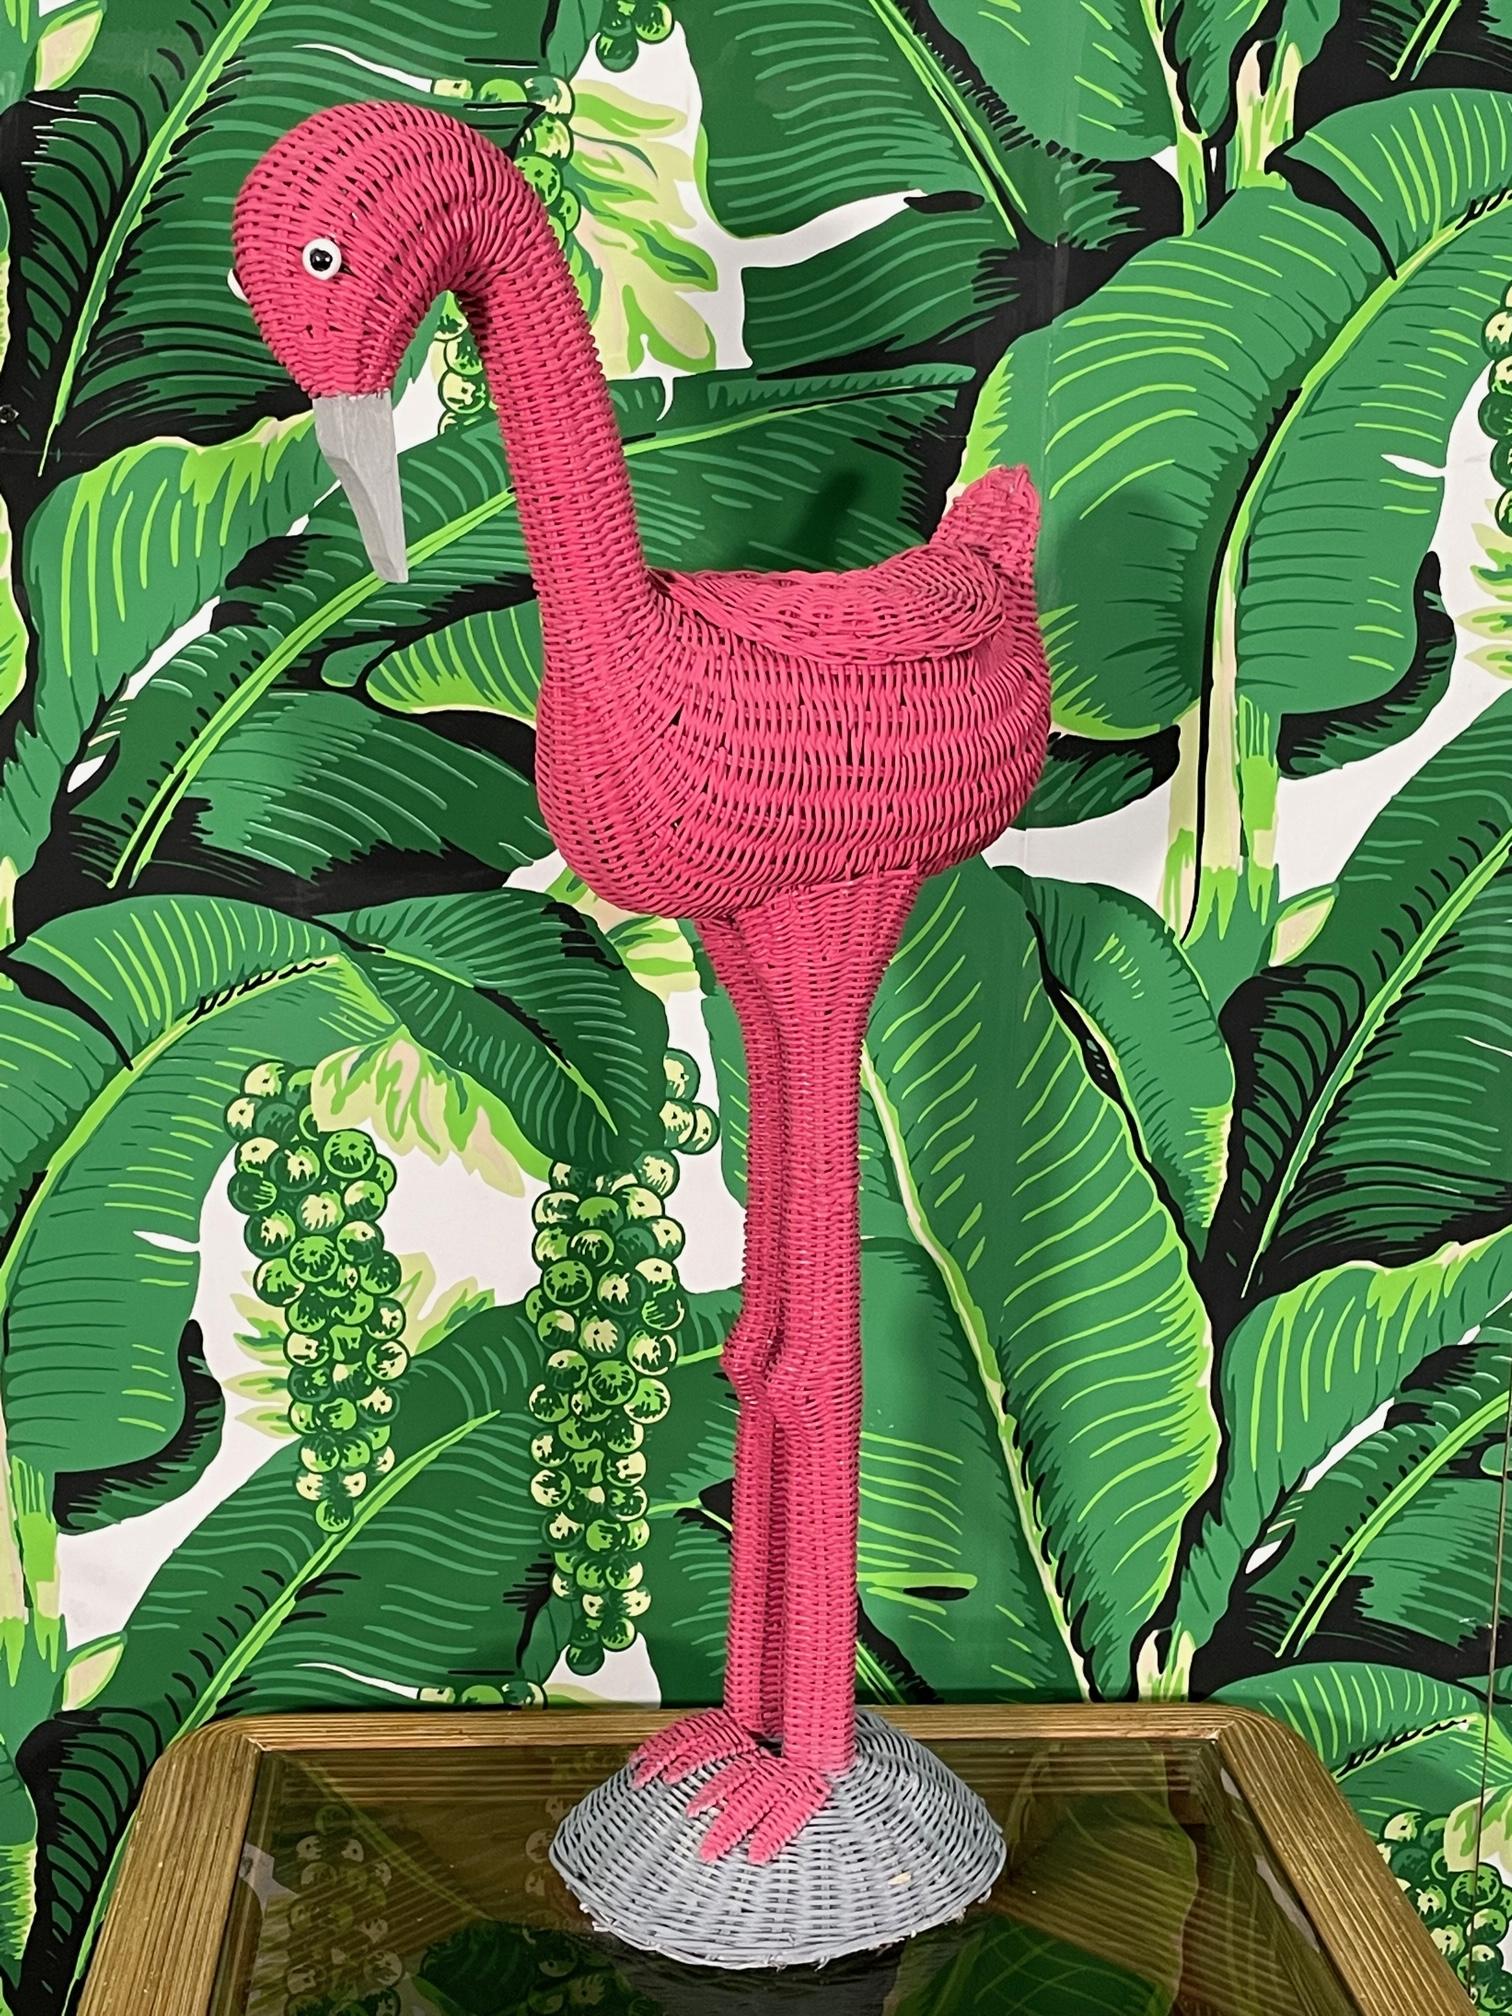 Super cute wicker flamingo has a built in bowl for use as a planter of other decorative ideas. Nice bright pick with a gray base. Good condition with minor imperfections consistent with age, see photos for condition details.
For a shipping quote to